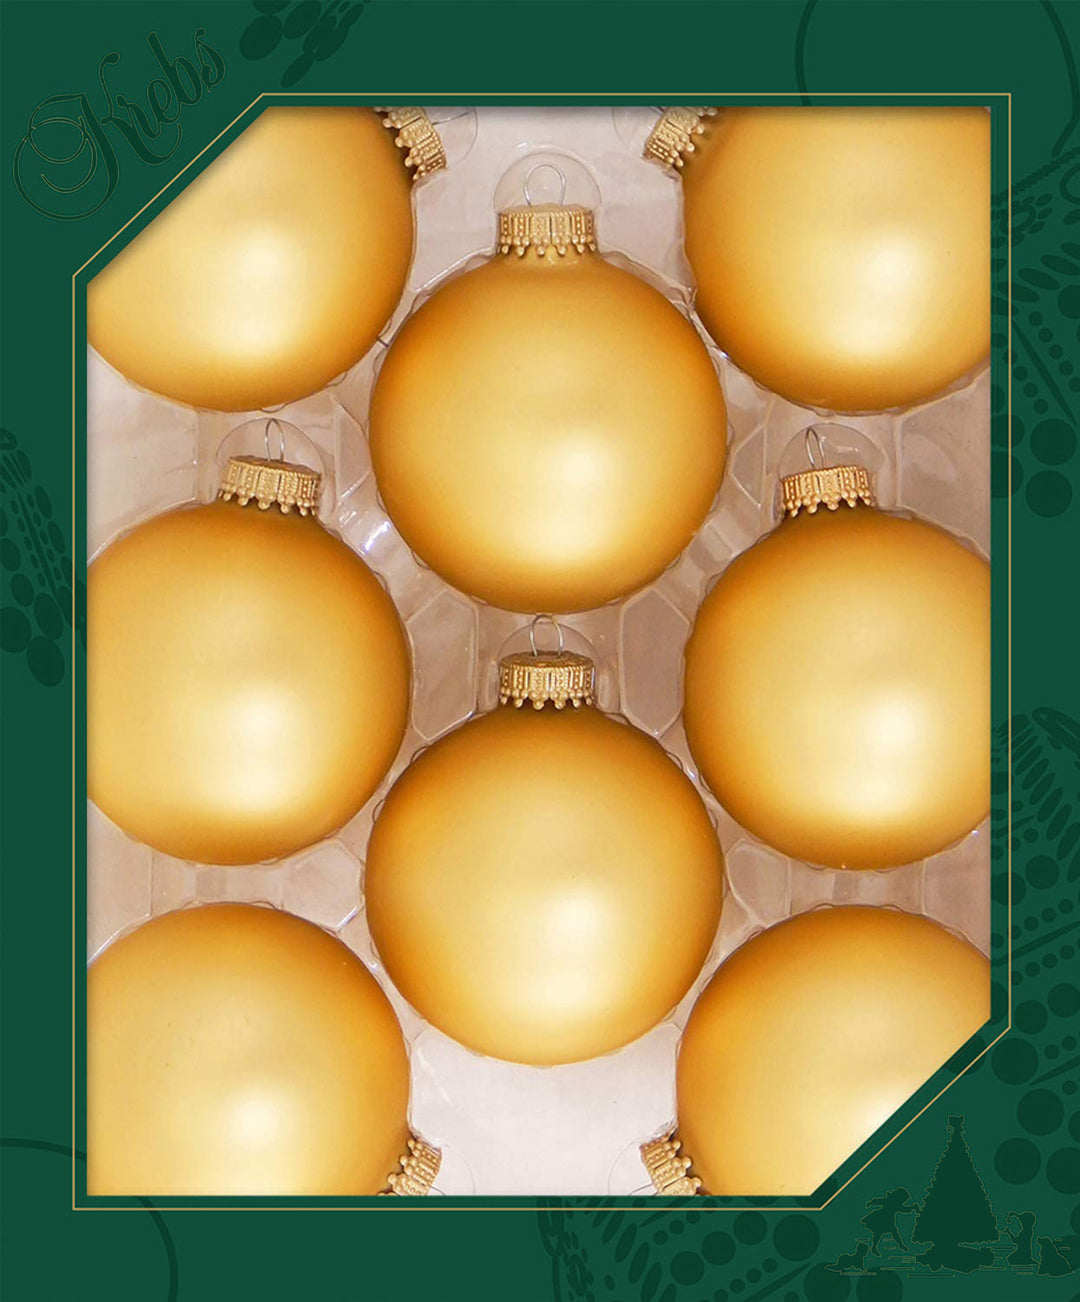 Glass Christmas Tree Ornaments - 67mm / 2.63" [8 Pieces] Designer Balls from Christmas By Krebs Seamless Hanging Holiday Decor (Velvet Honey Gold)